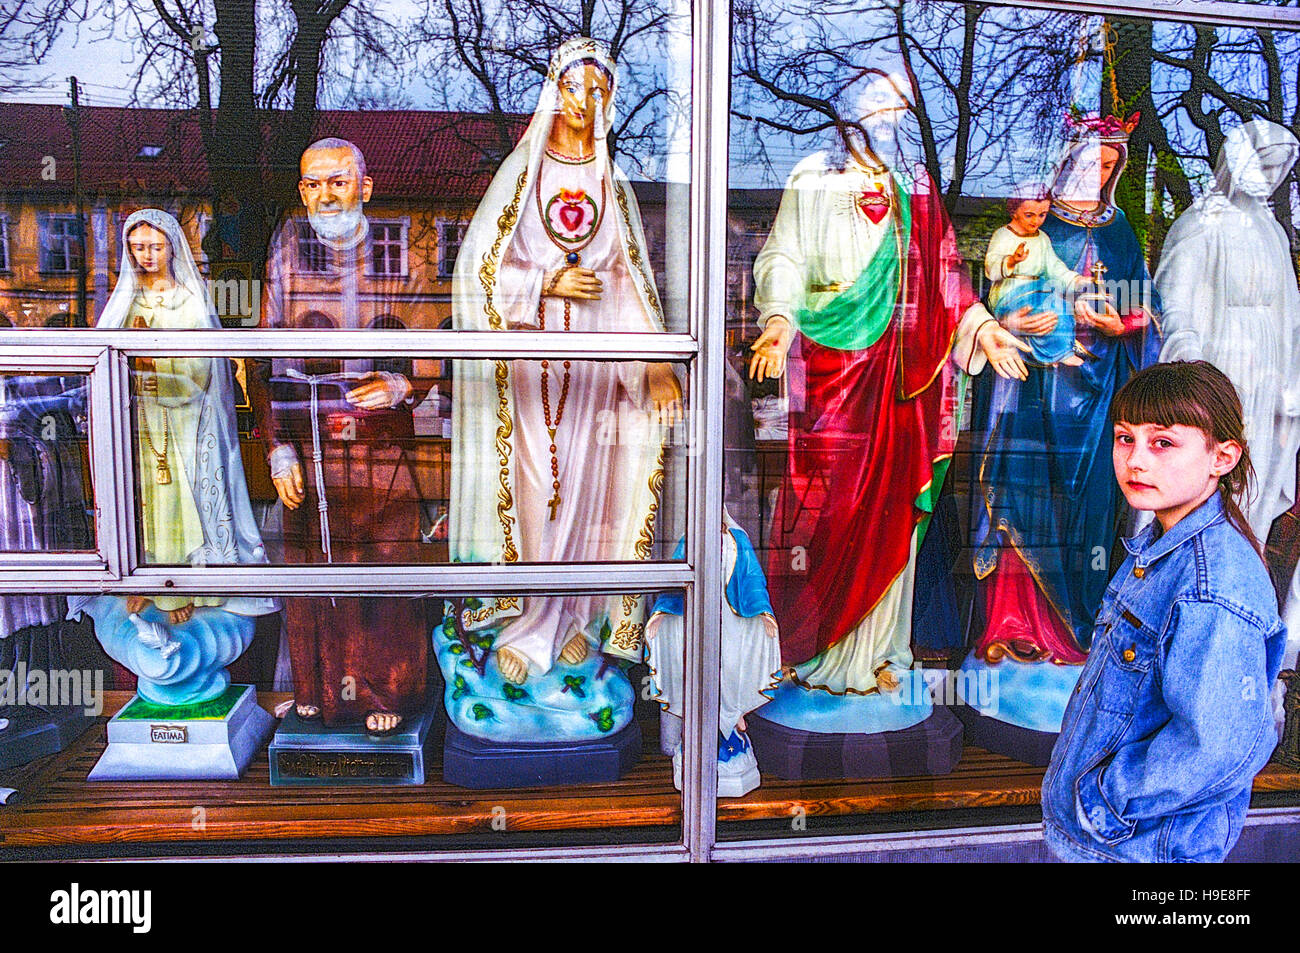 Czestochowa Poland, Young Preteen Girl in front of Shop Window Display with Religious Votive Products Articles Sacred Roman Catholic Saints Stock Photo